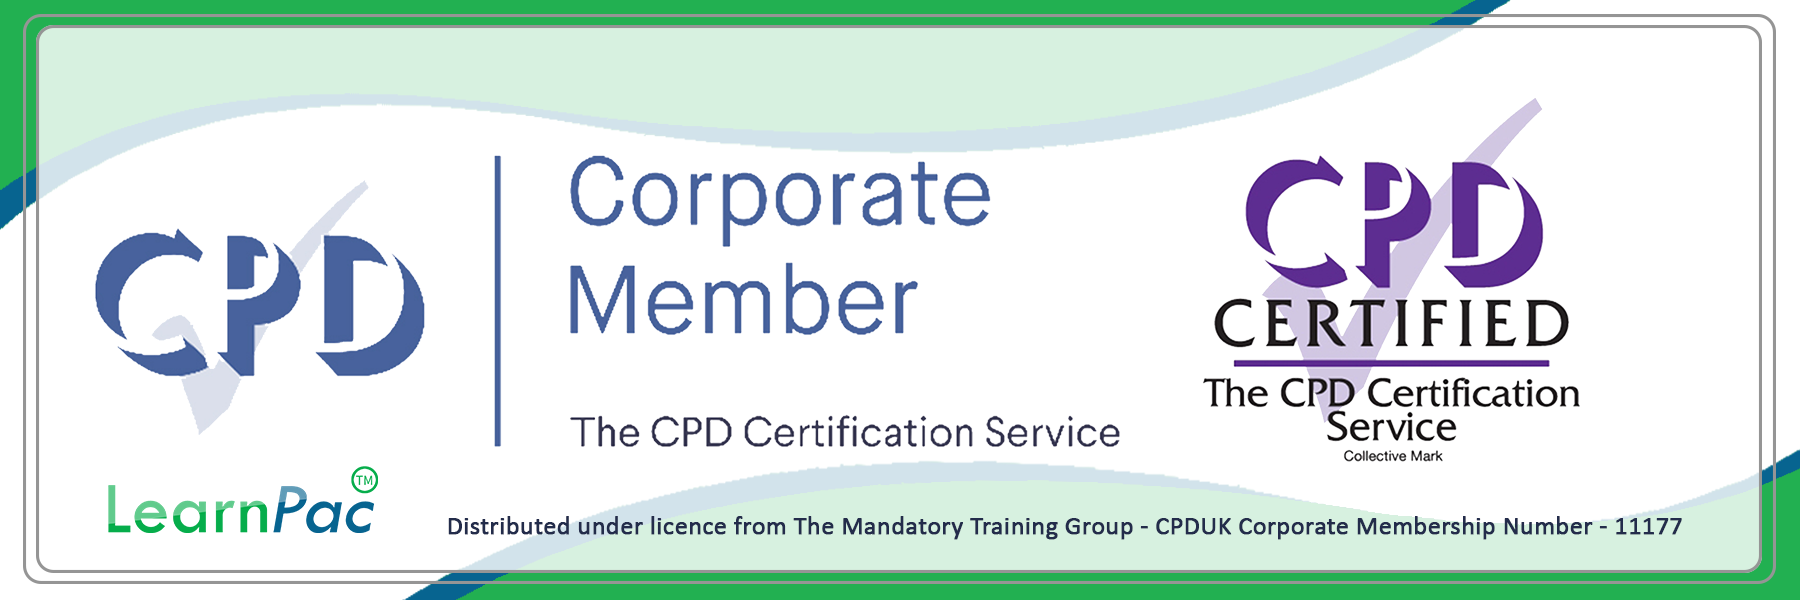 Mental Health Law - E-Learning Courses with Certificates - CPD Certified - LearnPac Systems UK -